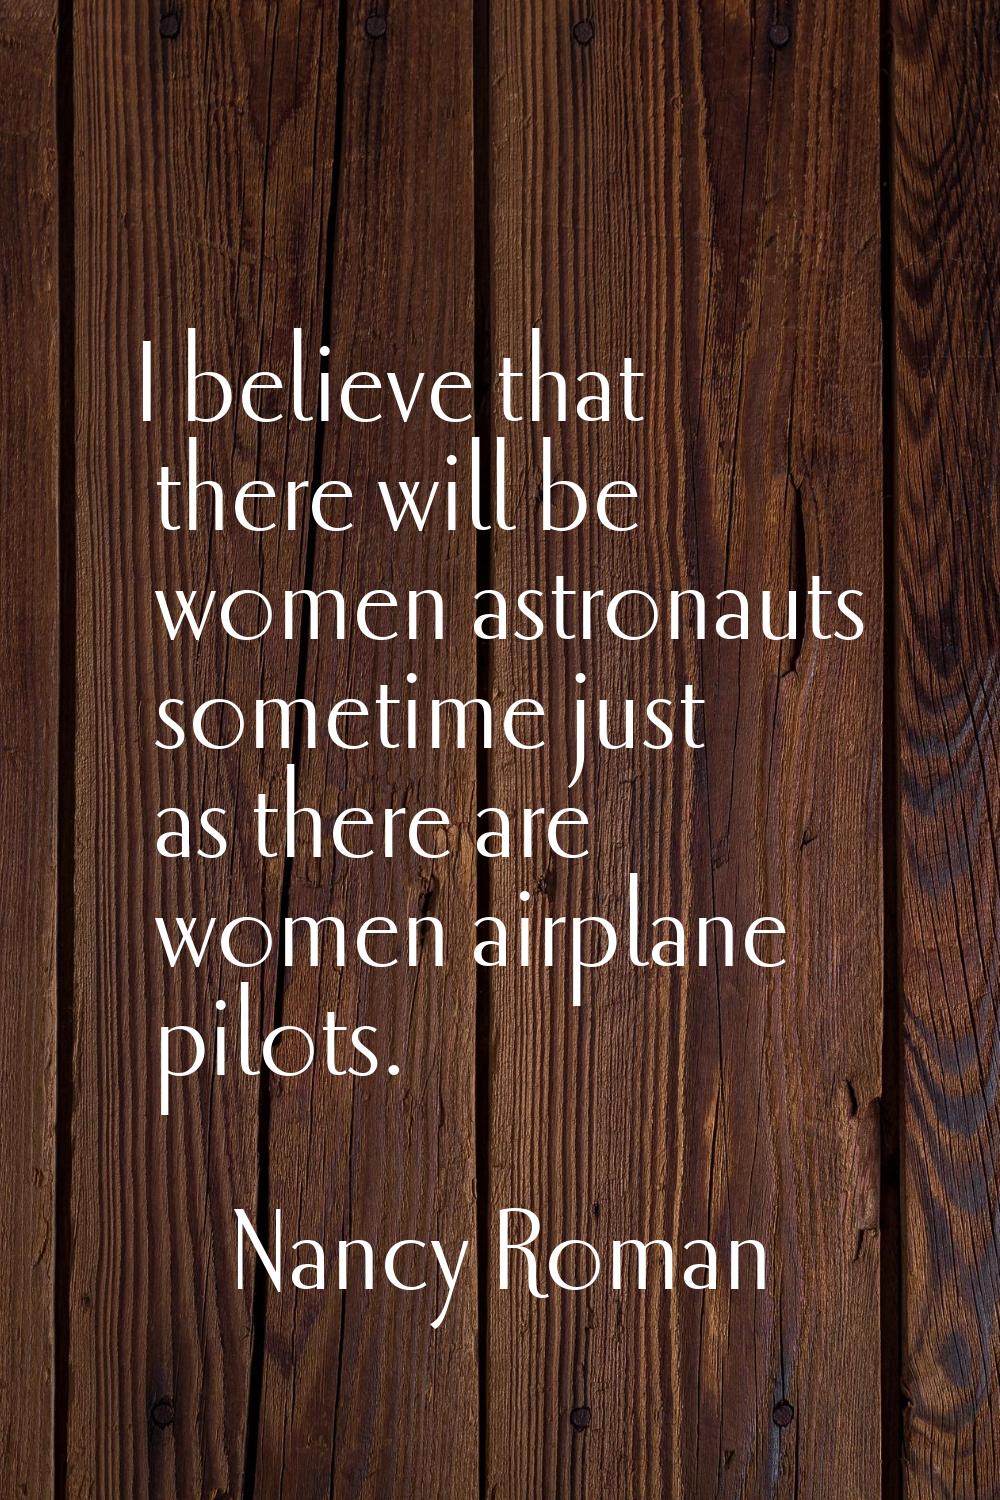 I believe that there will be women astronauts sometime just as there are women airplane pilots.